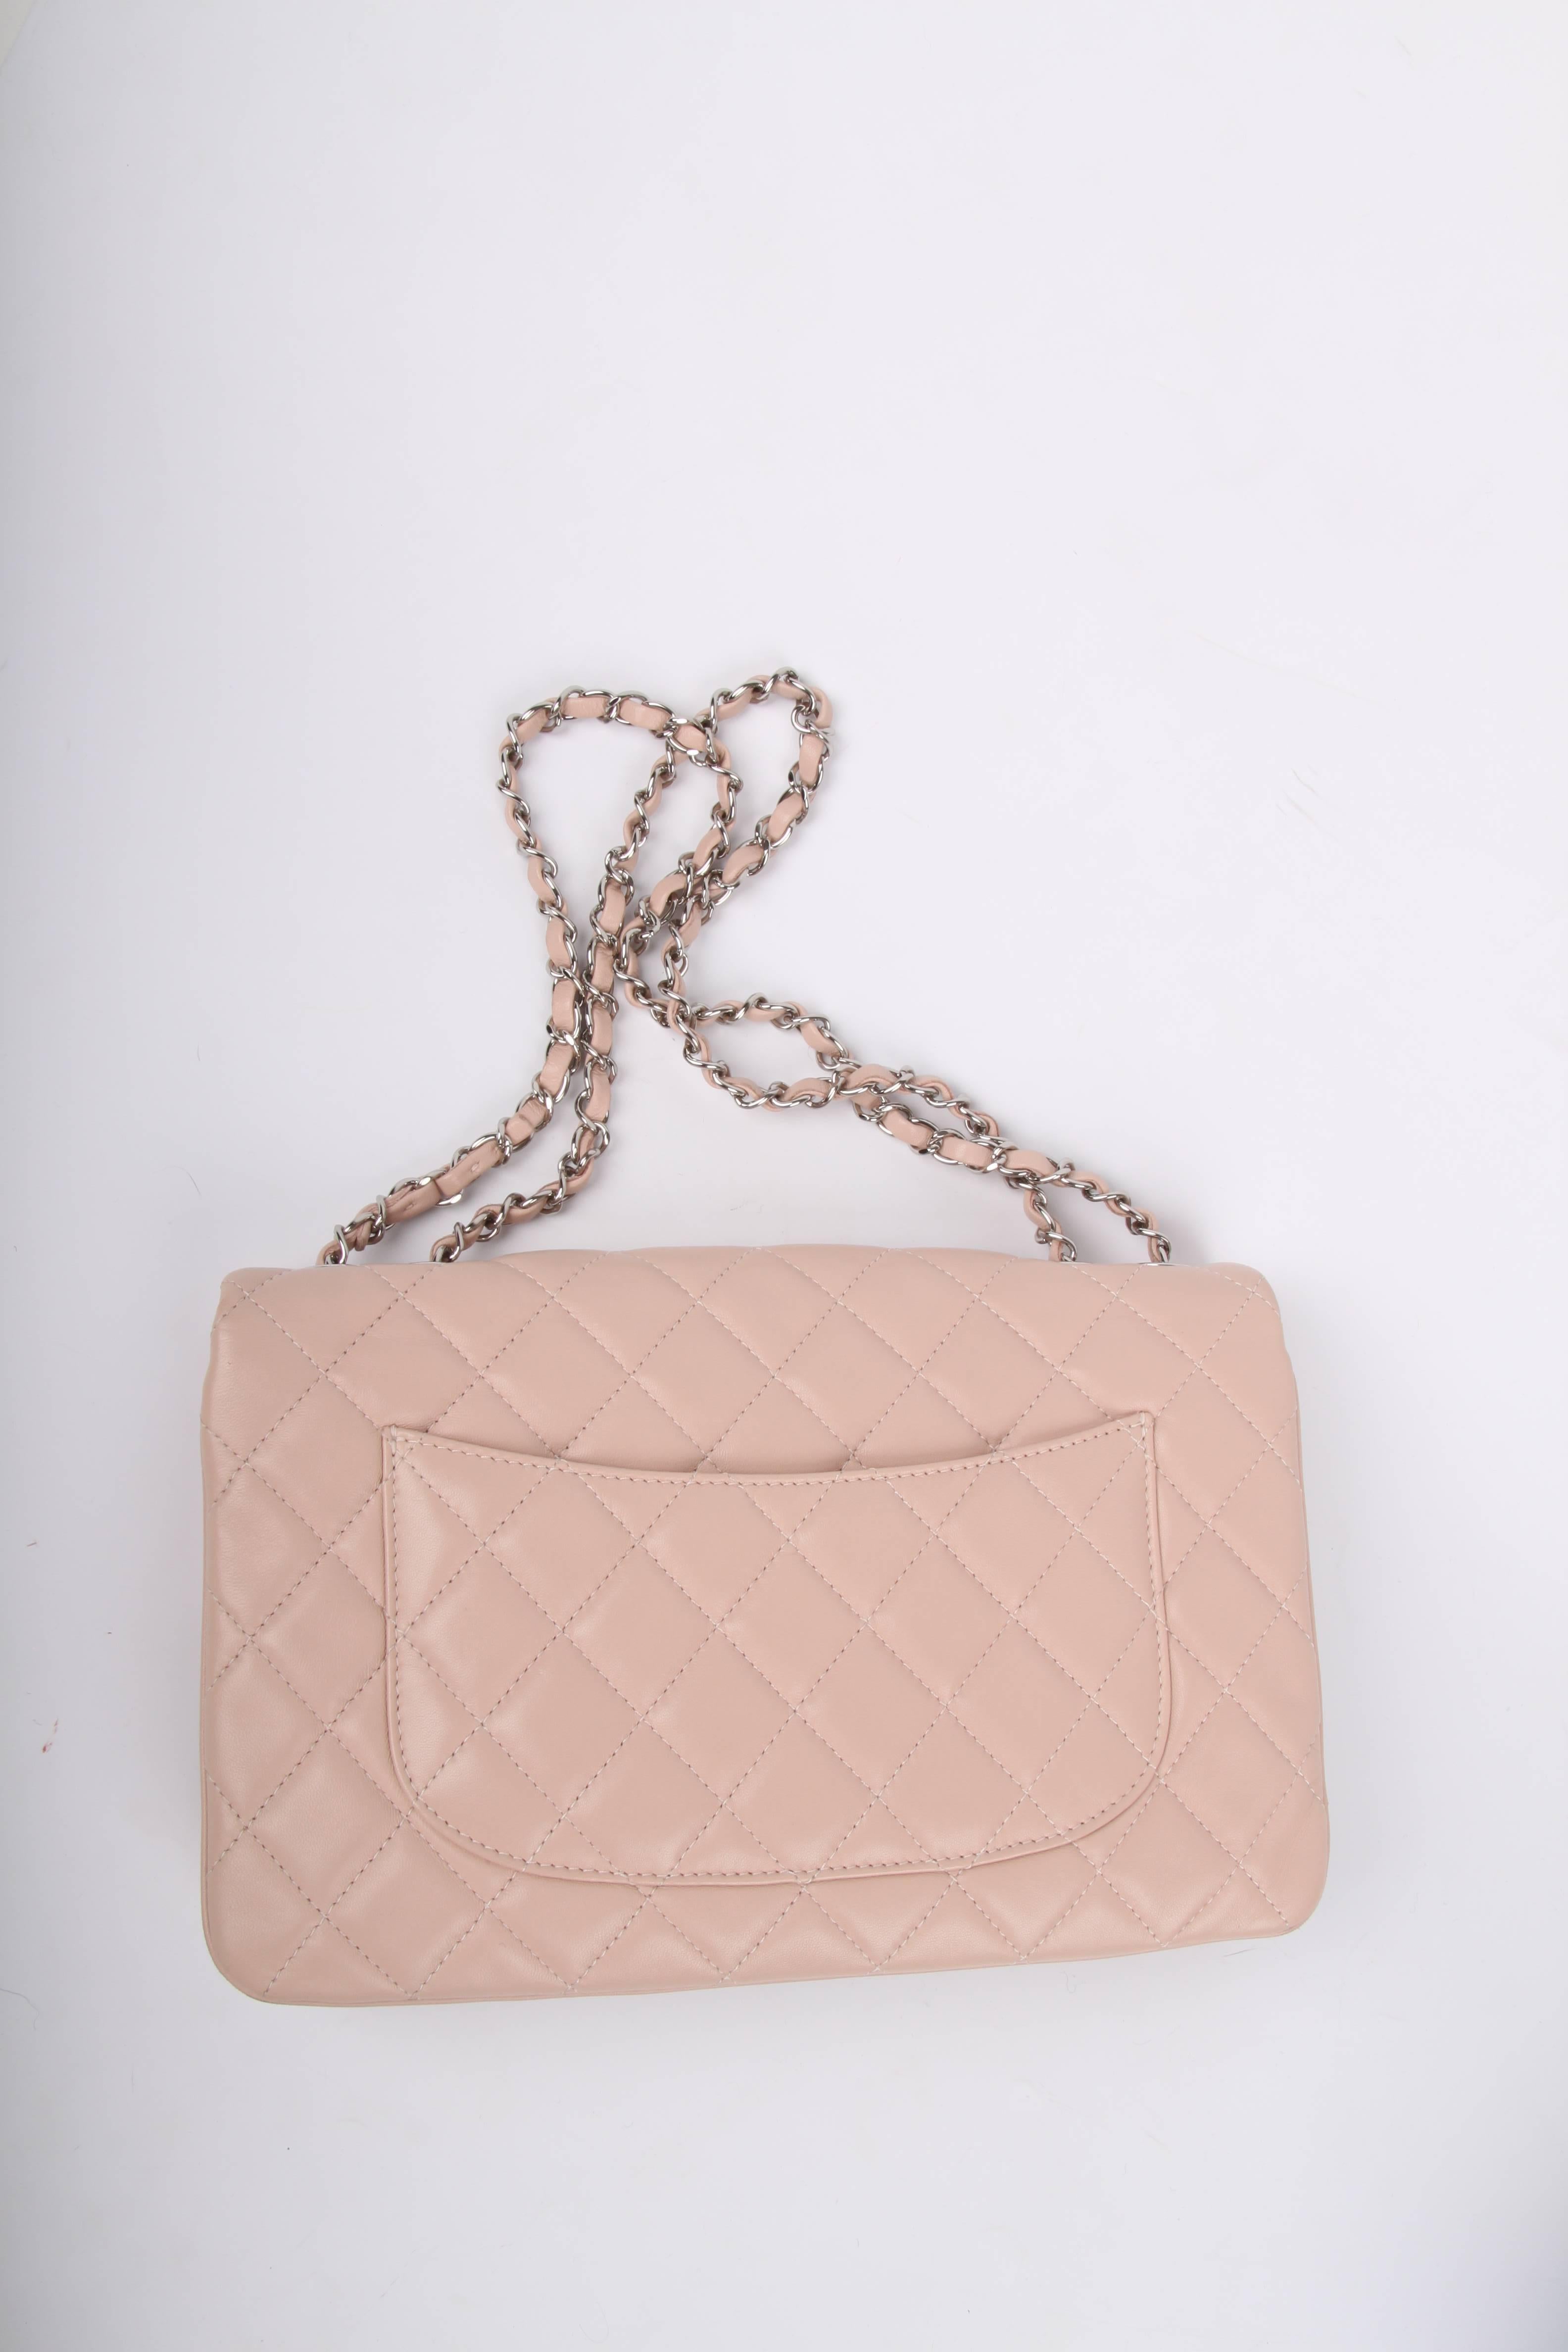 This highly sought after bag is called Chanel 3 Flap Bag. We love it.

The name says it al; it has three compartments, immediately visible on the exterior. The bag is crafted from soft lambskin leather in very light shade of pink. Silver-tone